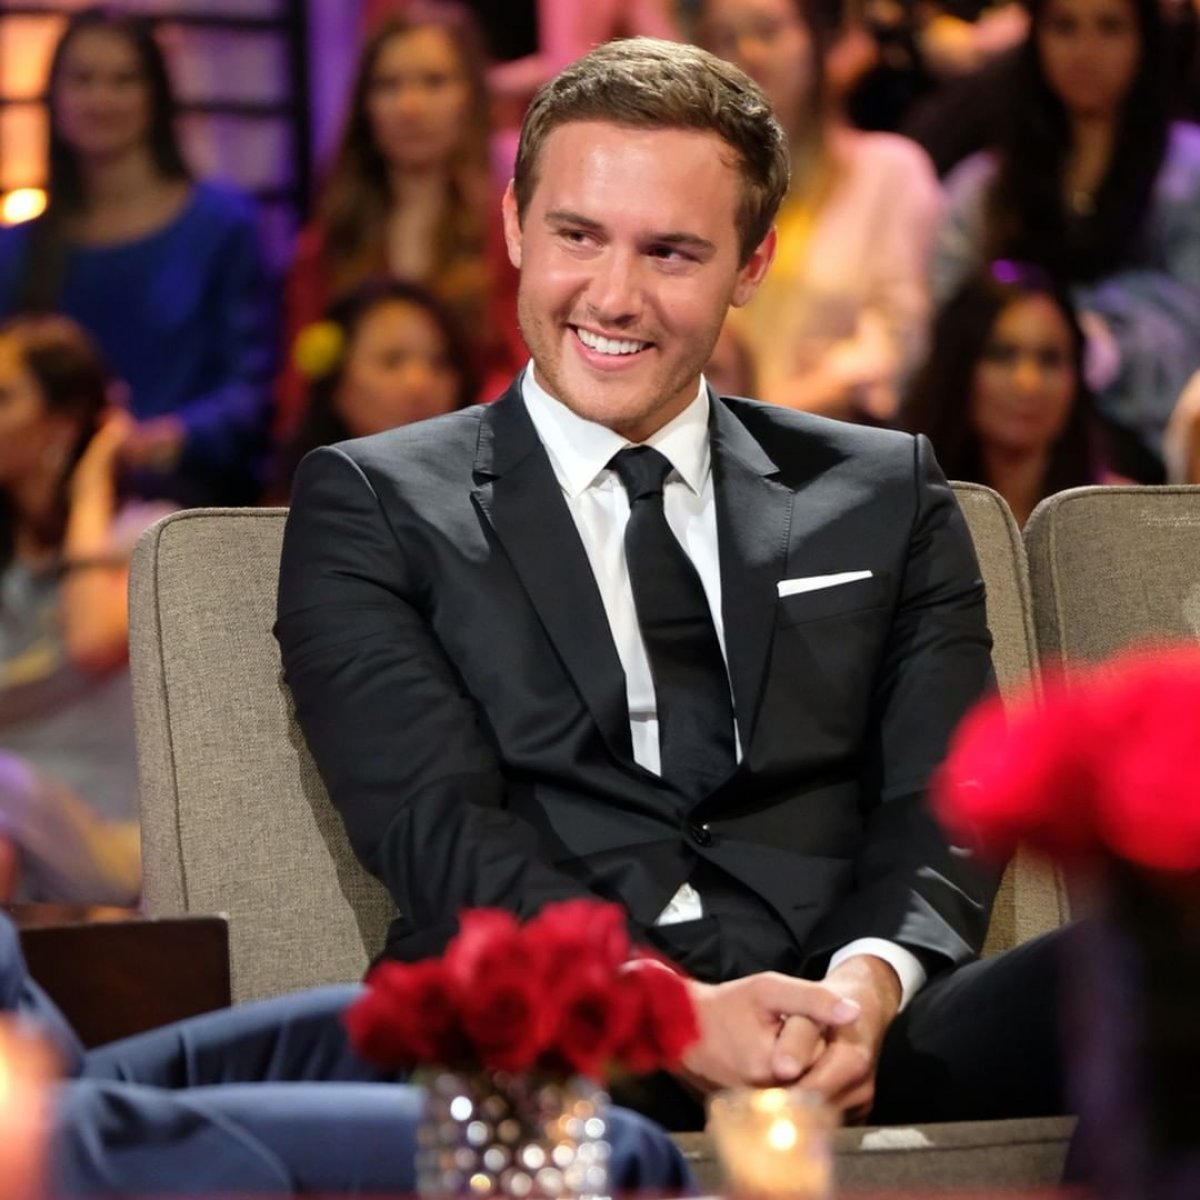 'The Bachelor' star Peter Weber reveals injury scar on face two months after fall ...